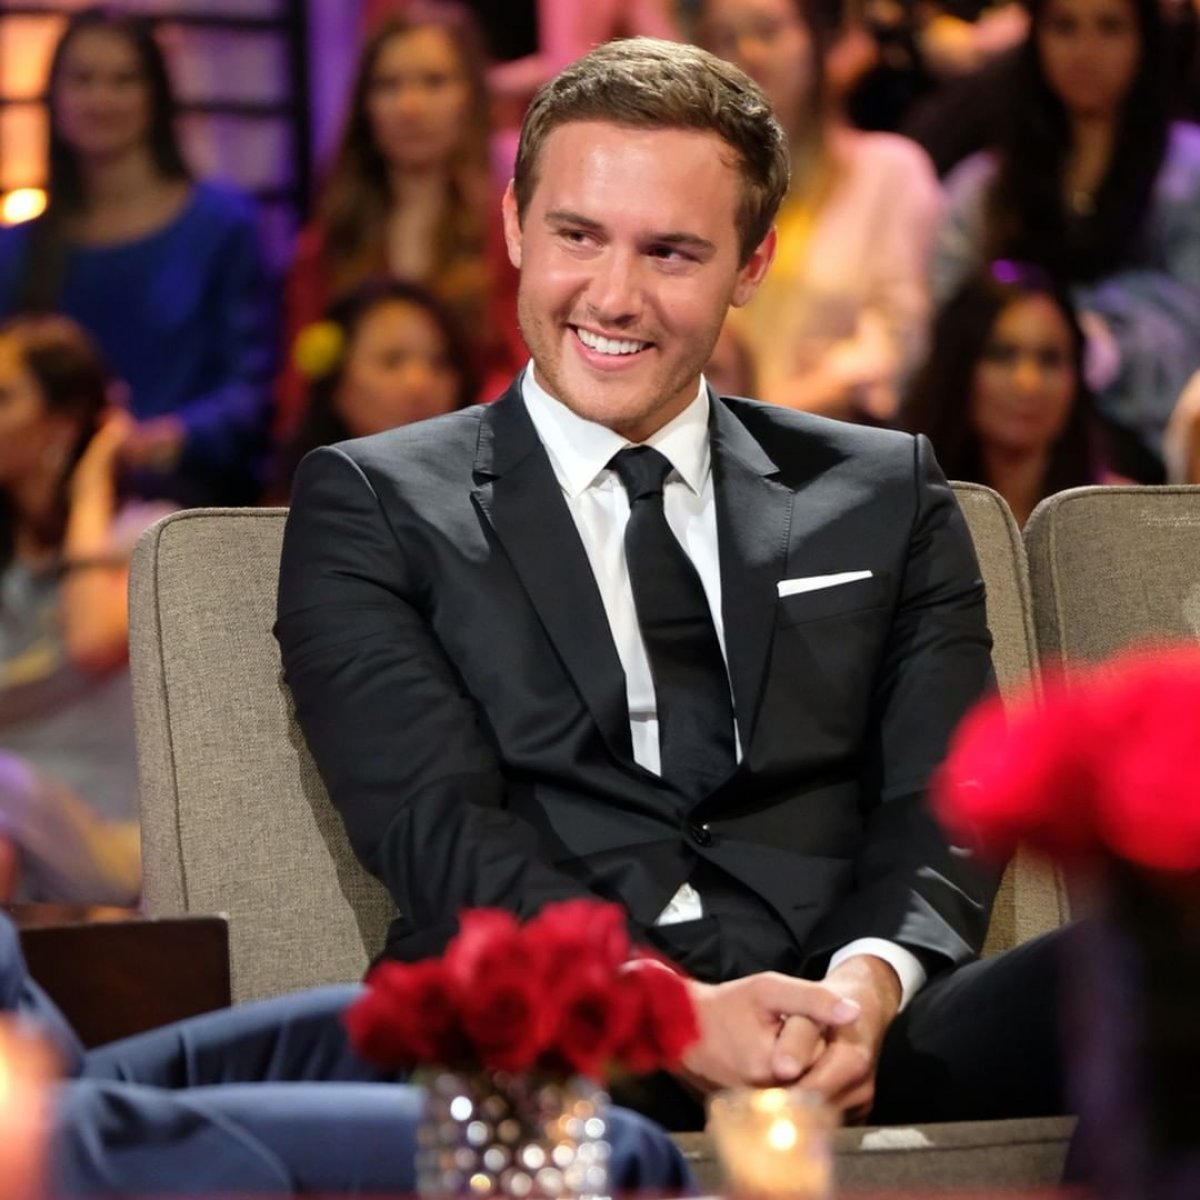 'The Bachelor' star Peter Weber reveals injury scar on face two months after fall ...